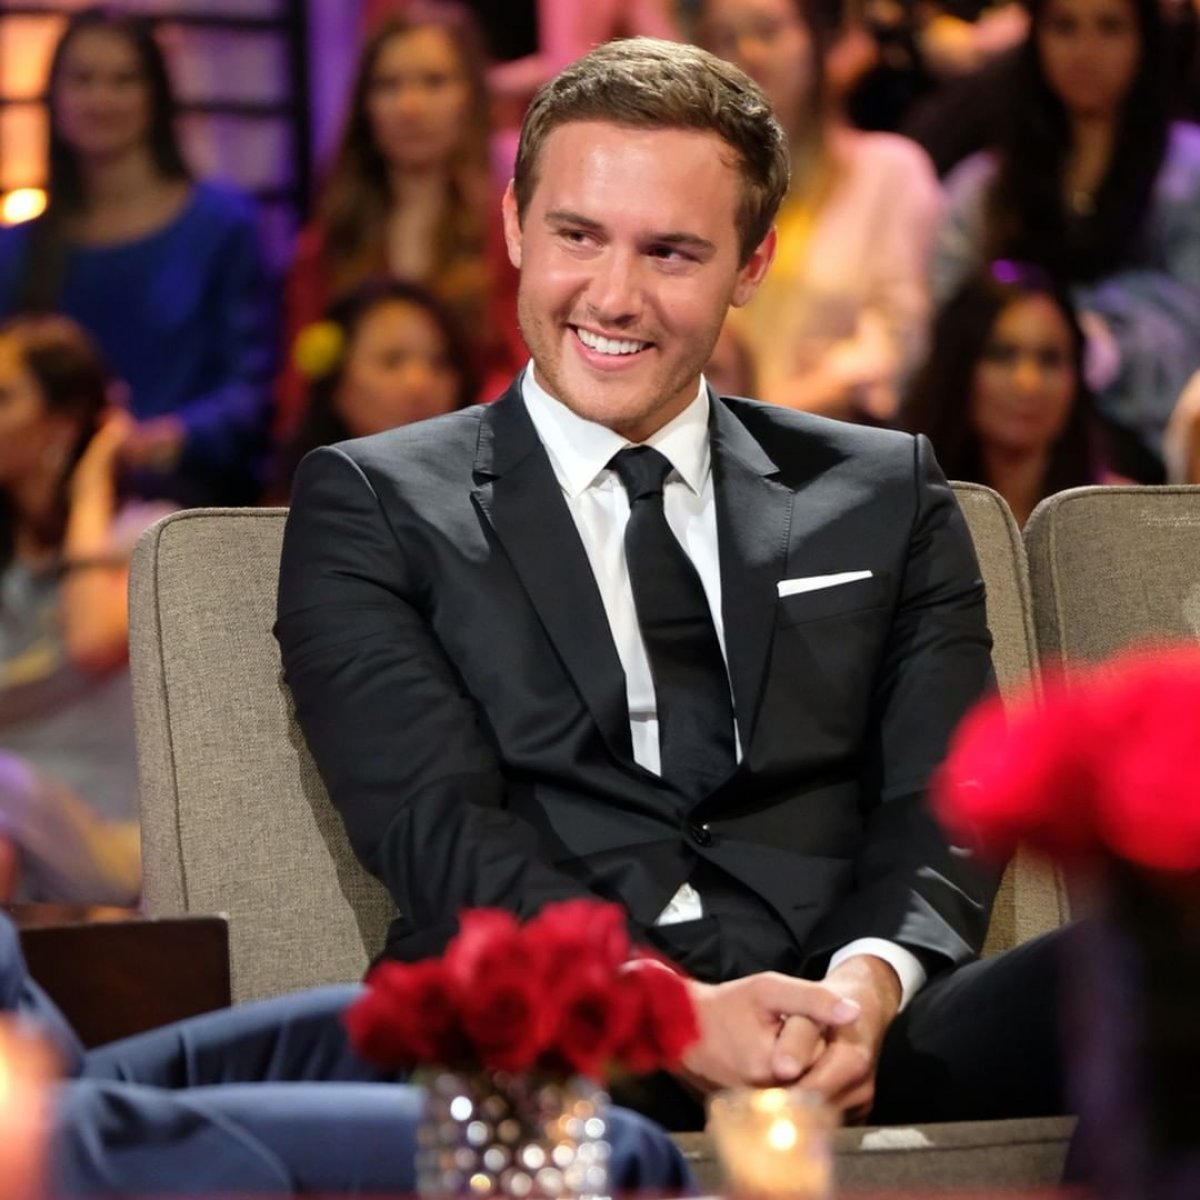 'The Bachelor' star Peter Weber reveals injury scar on face two months after fall ...